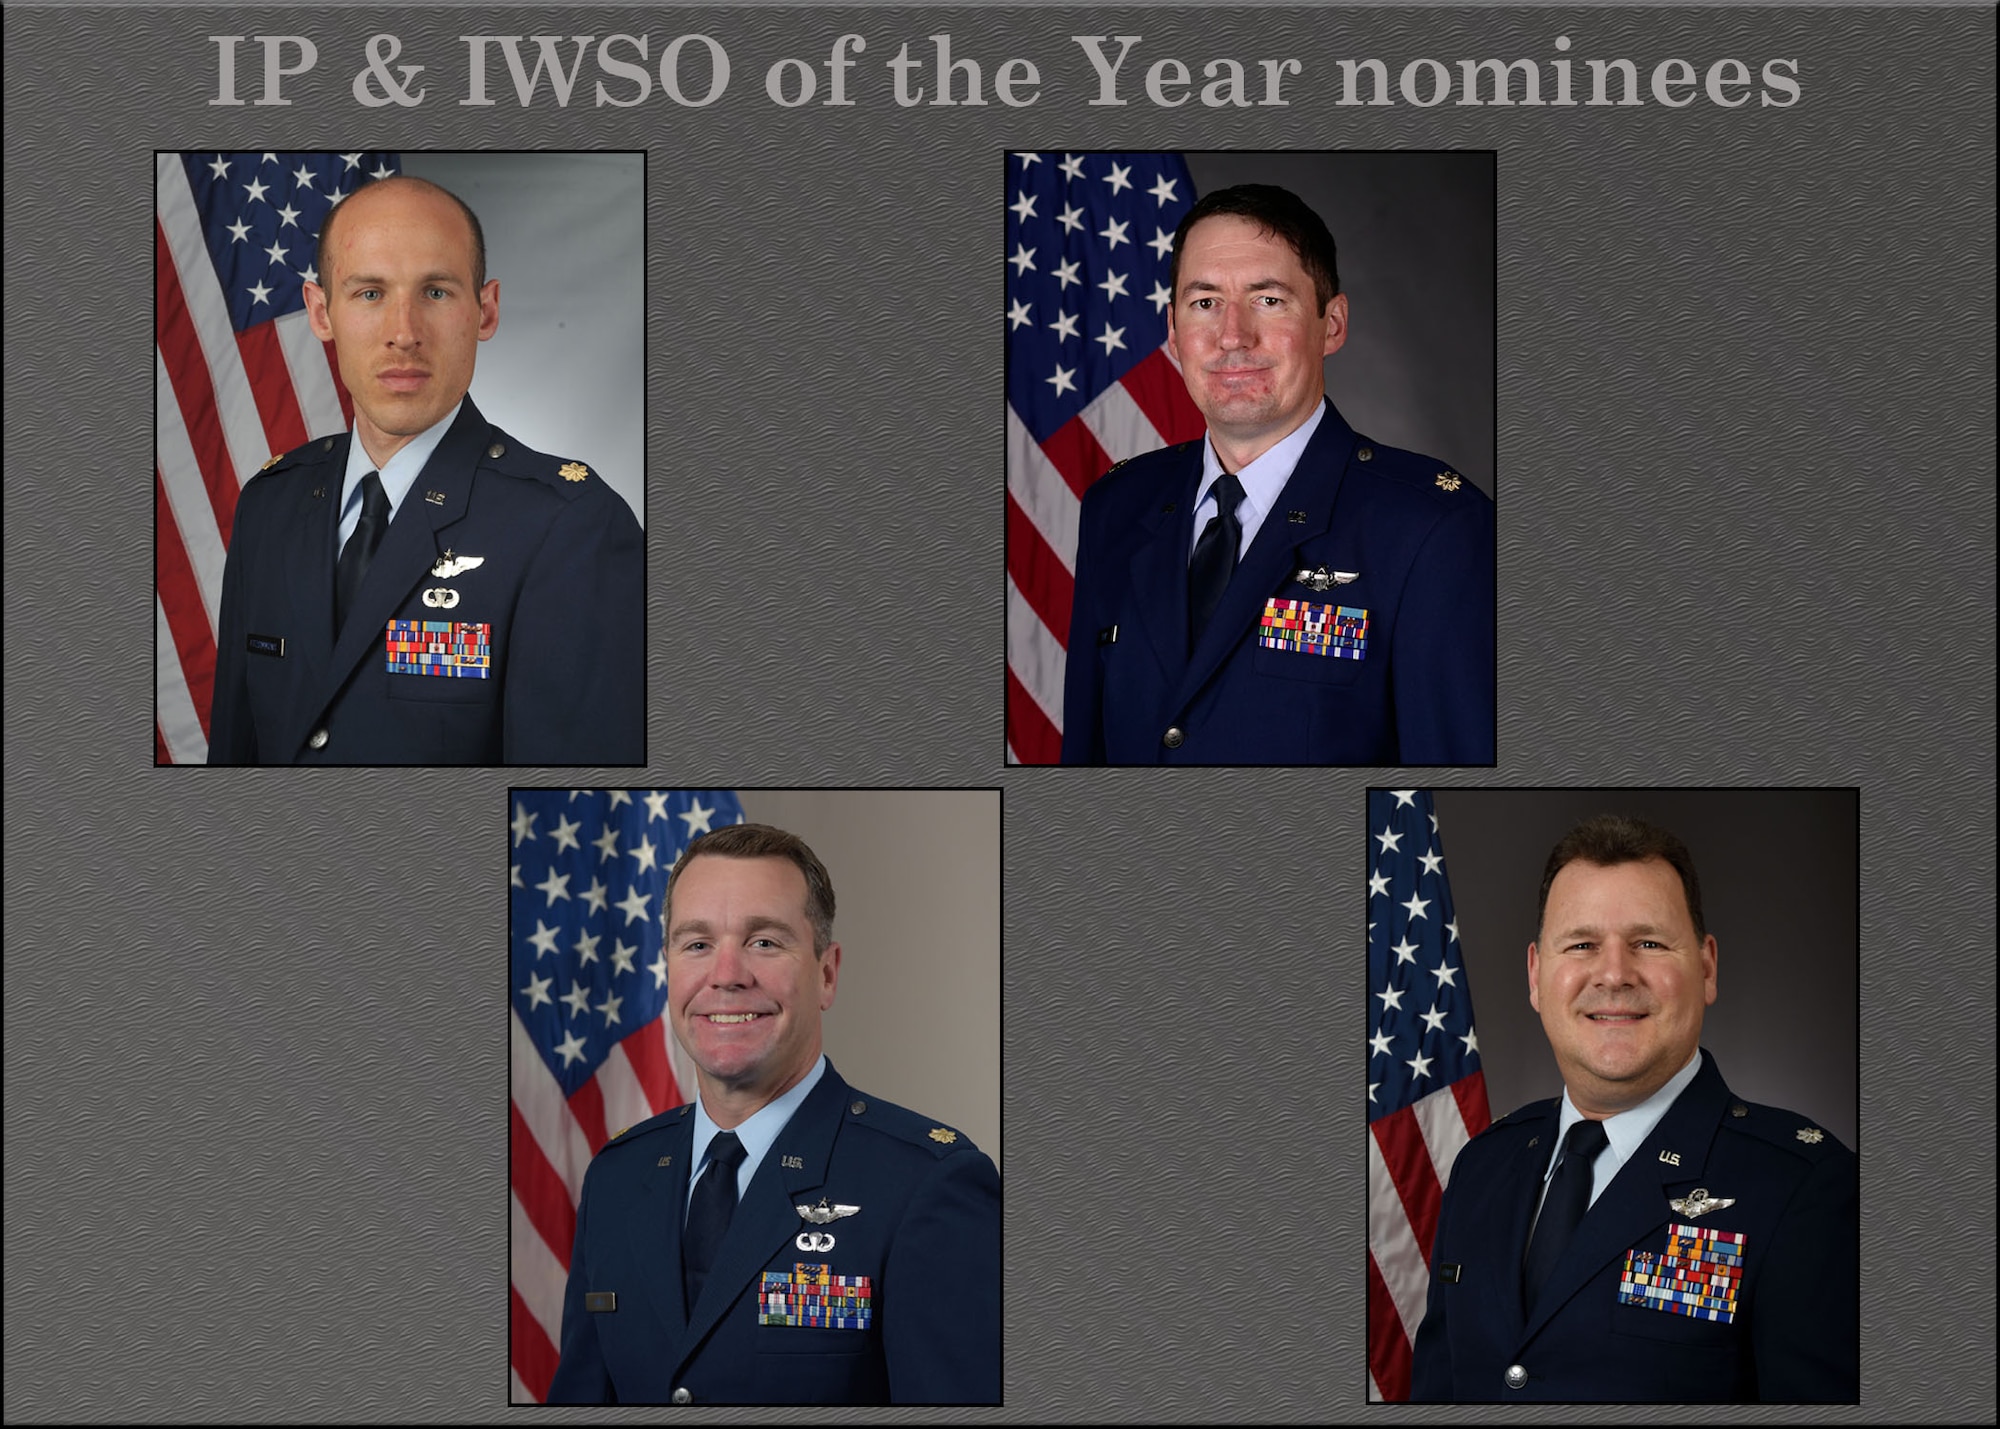 The 944th Fighter Wing 2020 Annual Awards Instructor Pilots and Instructor Weapons Systems Operator nominees. (U.S. Air Force photo illustration by Master Sgt. Louis Vega Jr.)